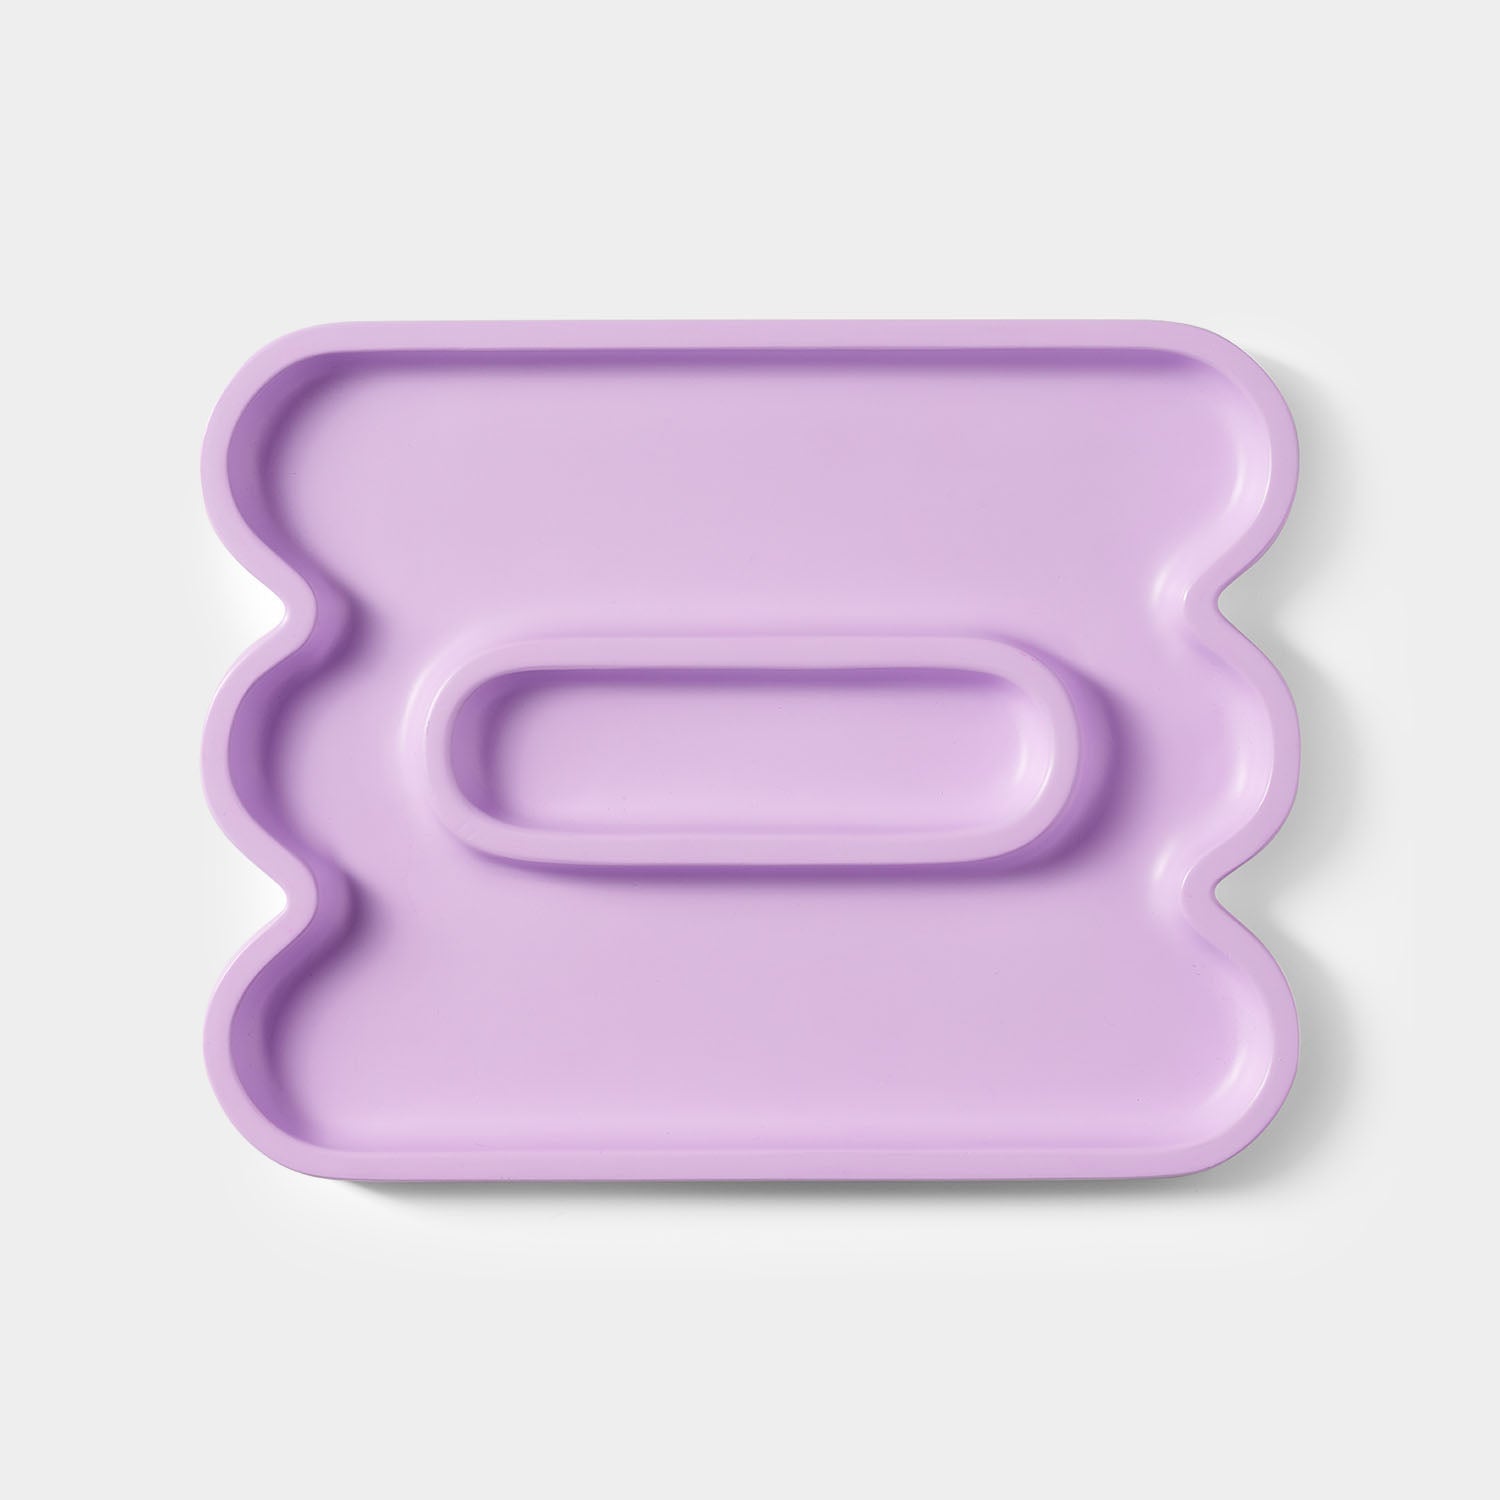 Templo Catchall Wave in purple by OCTAEVO